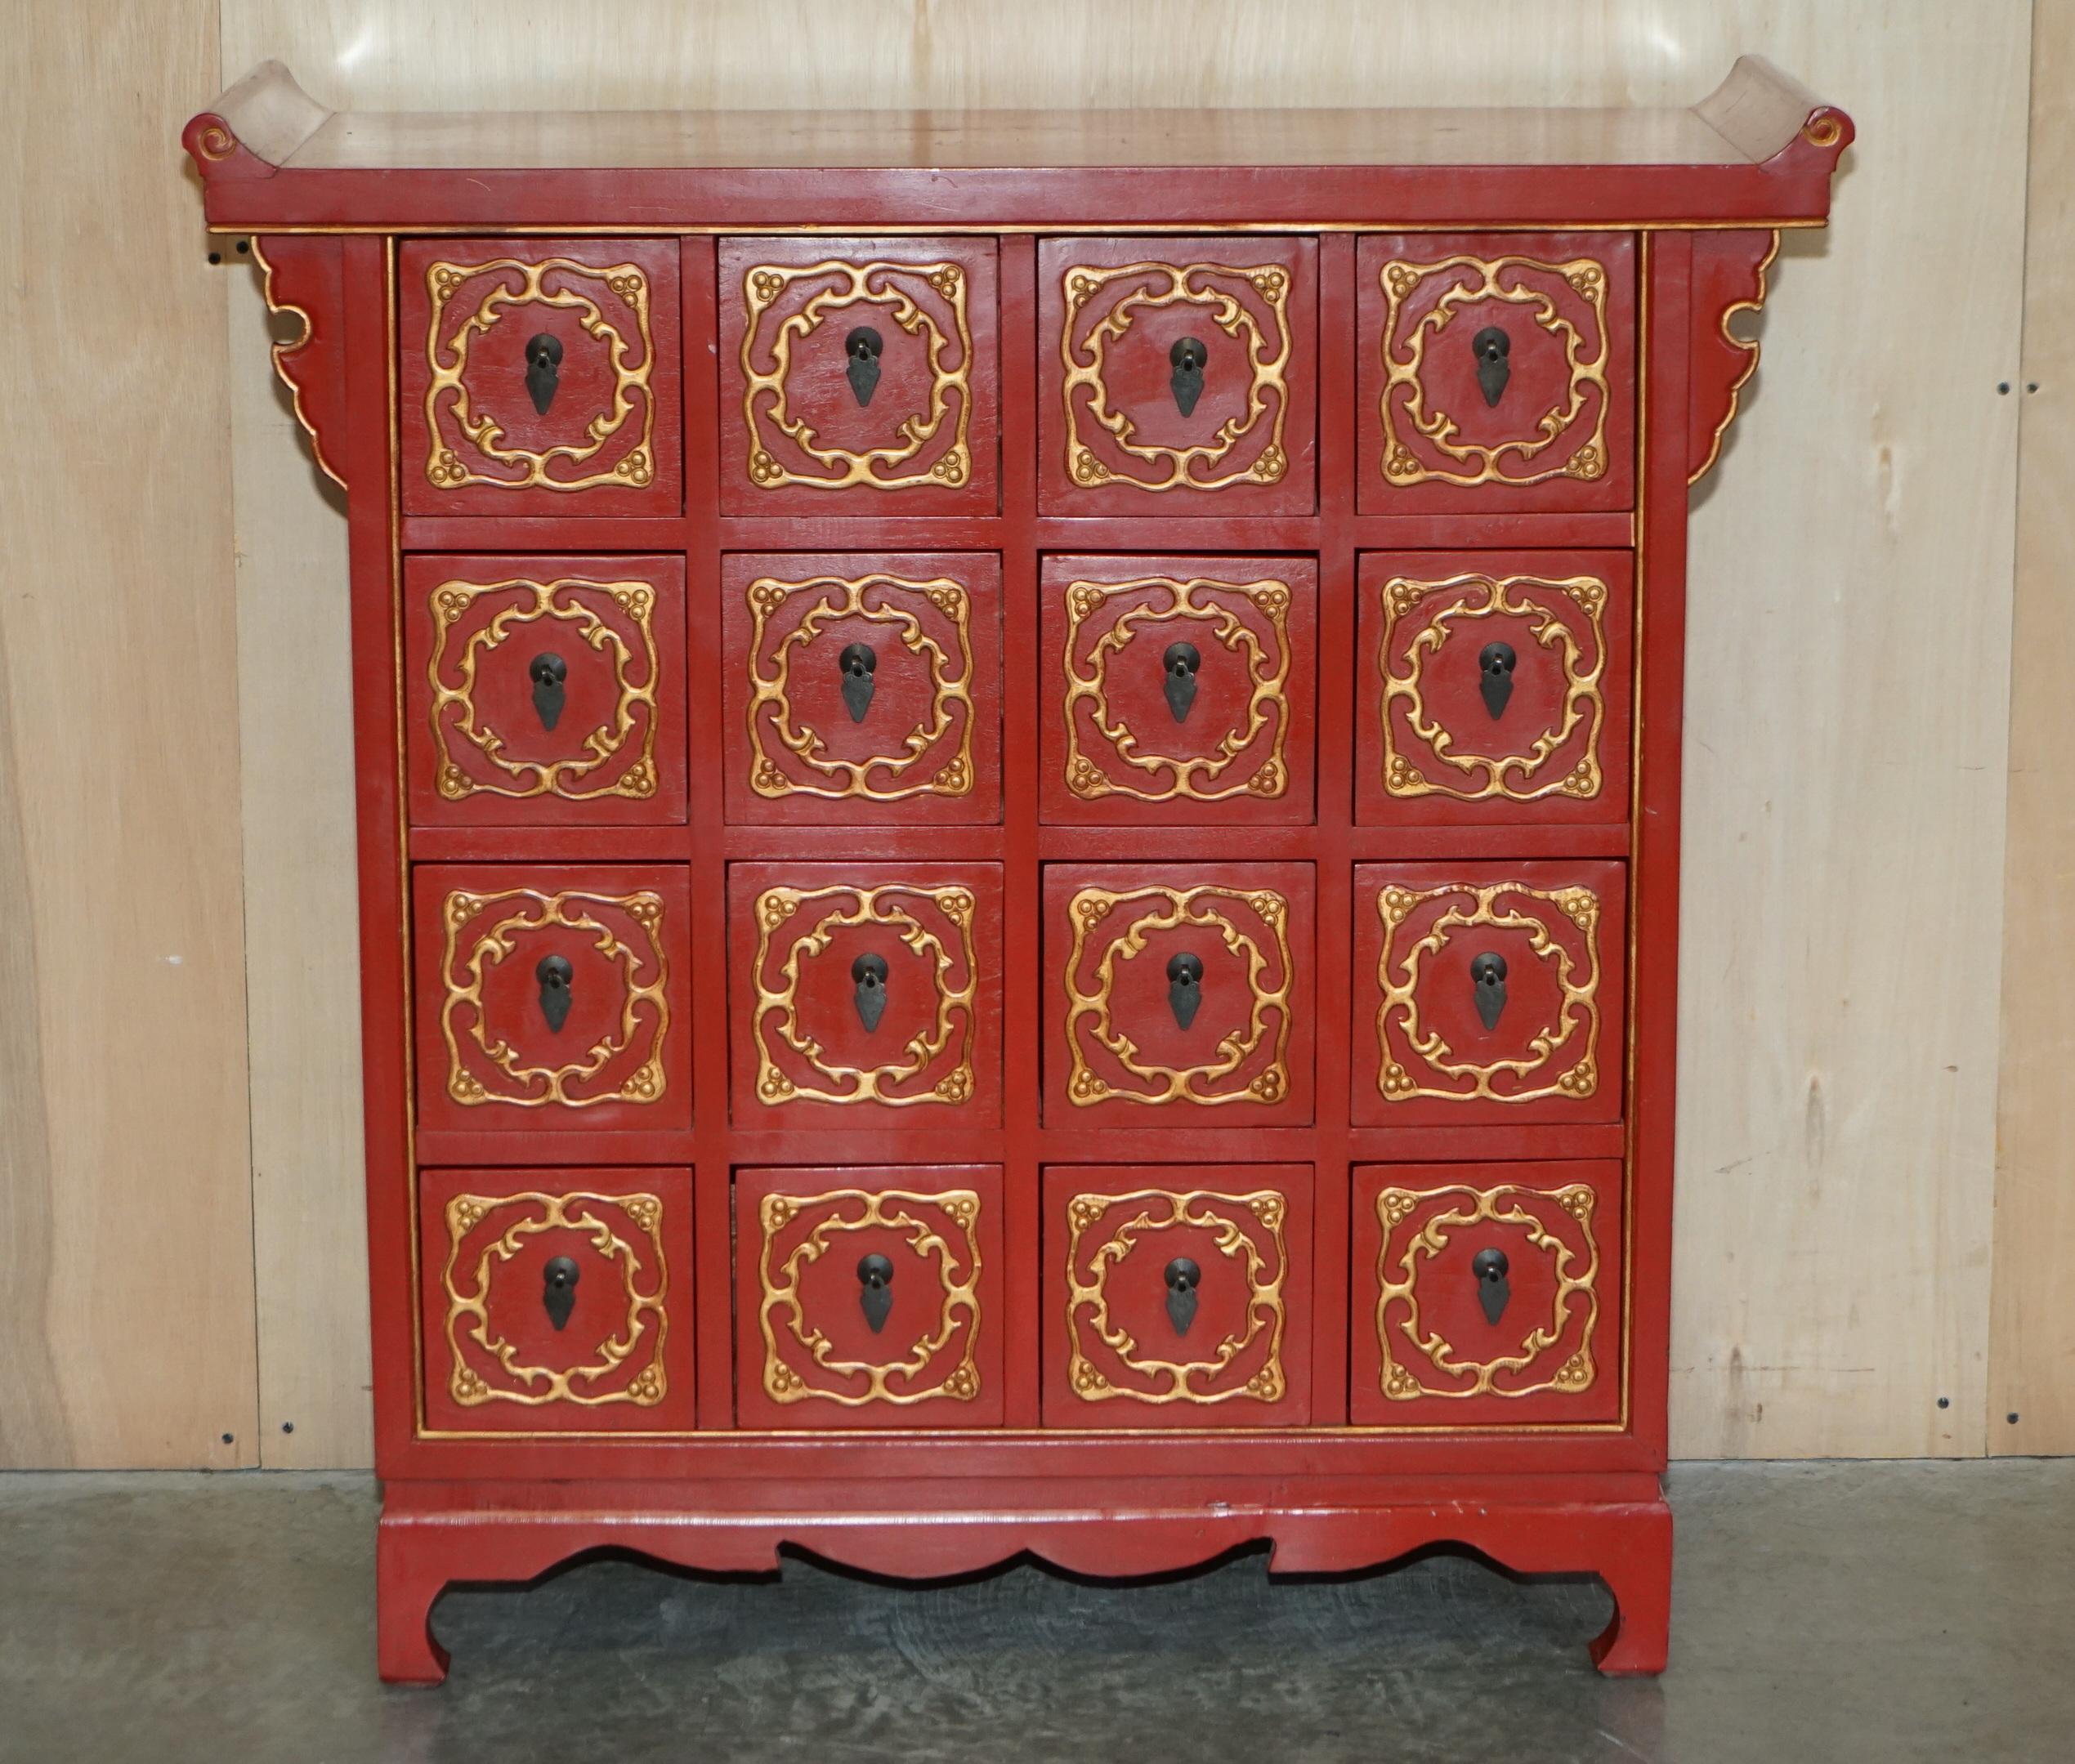 We are delighted to offer for sale this lovely vintage circa 1930's hand painted and lacquered Chinese collectors tea cabinet with lots of drawers.

A very good looking and well made piece, these are now highly collectable as art furniture. This